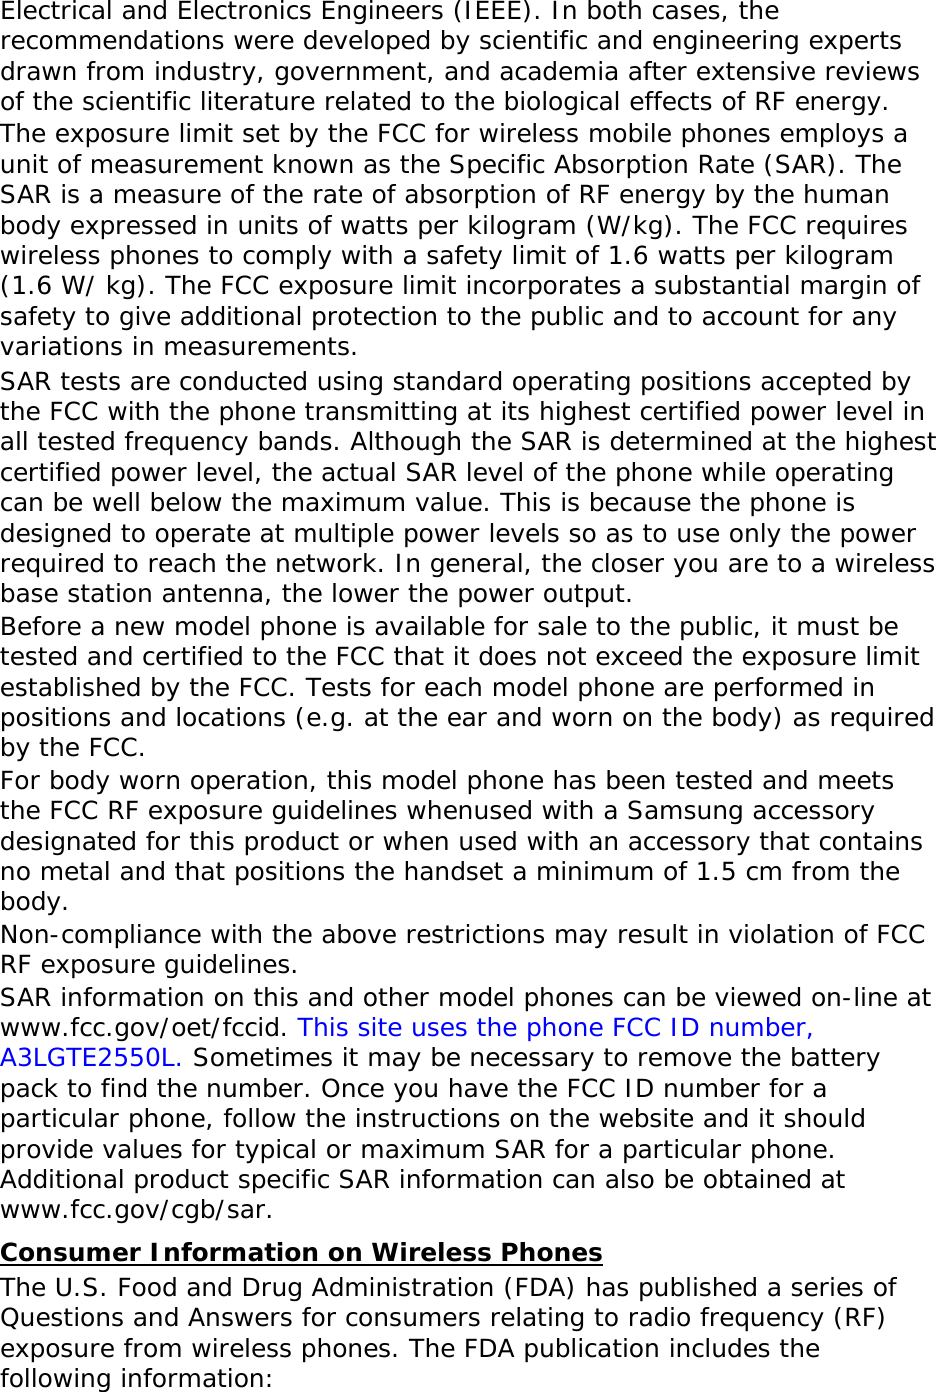 Electrical and Electronics Engineers (IEEE). In both cases, the recommendations were developed by scientific and engineering experts drawn from industry, government, and academia after extensive reviews of the scientific literature related to the biological effects of RF energy. The exposure limit set by the FCC for wireless mobile phones employs a unit of measurement known as the Specific Absorption Rate (SAR). The SAR is a measure of the rate of absorption of RF energy by the human body expressed in units of watts per kilogram (W/kg). The FCC requires wireless phones to comply with a safety limit of 1.6 watts per kilogram (1.6 W/ kg). The FCC exposure limit incorporates a substantial margin of safety to give additional protection to the public and to account for any variations in measurements. SAR tests are conducted using standard operating positions accepted by the FCC with the phone transmitting at its highest certified power level in all tested frequency bands. Although the SAR is determined at the highest certified power level, the actual SAR level of the phone while operating can be well below the maximum value. This is because the phone is designed to operate at multiple power levels so as to use only the power required to reach the network. In general, the closer you are to a wireless base station antenna, the lower the power output. Before a new model phone is available for sale to the public, it must be tested and certified to the FCC that it does not exceed the exposure limit established by the FCC. Tests for each model phone are performed in positions and locations (e.g. at the ear and worn on the body) as required by the FCC.   For body worn operation, this model phone has been tested and meets the FCC RF exposure guidelines whenused with a Samsung accessory designated for this product or when used with an accessory that contains no metal and that positions the handset a minimum of 1.5 cm from the body.  Non-compliance with the above restrictions may result in violation of FCC RF exposure guidelines. SAR information on this and other model phones can be viewed on-line at www.fcc.gov/oet/fccid. This site uses the phone FCC ID number, A3LGTE2550L. Sometimes it may be necessary to remove the battery pack to find the number. Once you have the FCC ID number for a particular phone, follow the instructions on the website and it should provide values for typical or maximum SAR for a particular phone. Additional product specific SAR information can also be obtained at www.fcc.gov/cgb/sar. Consumer Information on Wireless Phones The U.S. Food and Drug Administration (FDA) has published a series of Questions and Answers for consumers relating to radio frequency (RF) exposure from wireless phones. The FDA publication includes the following information: 